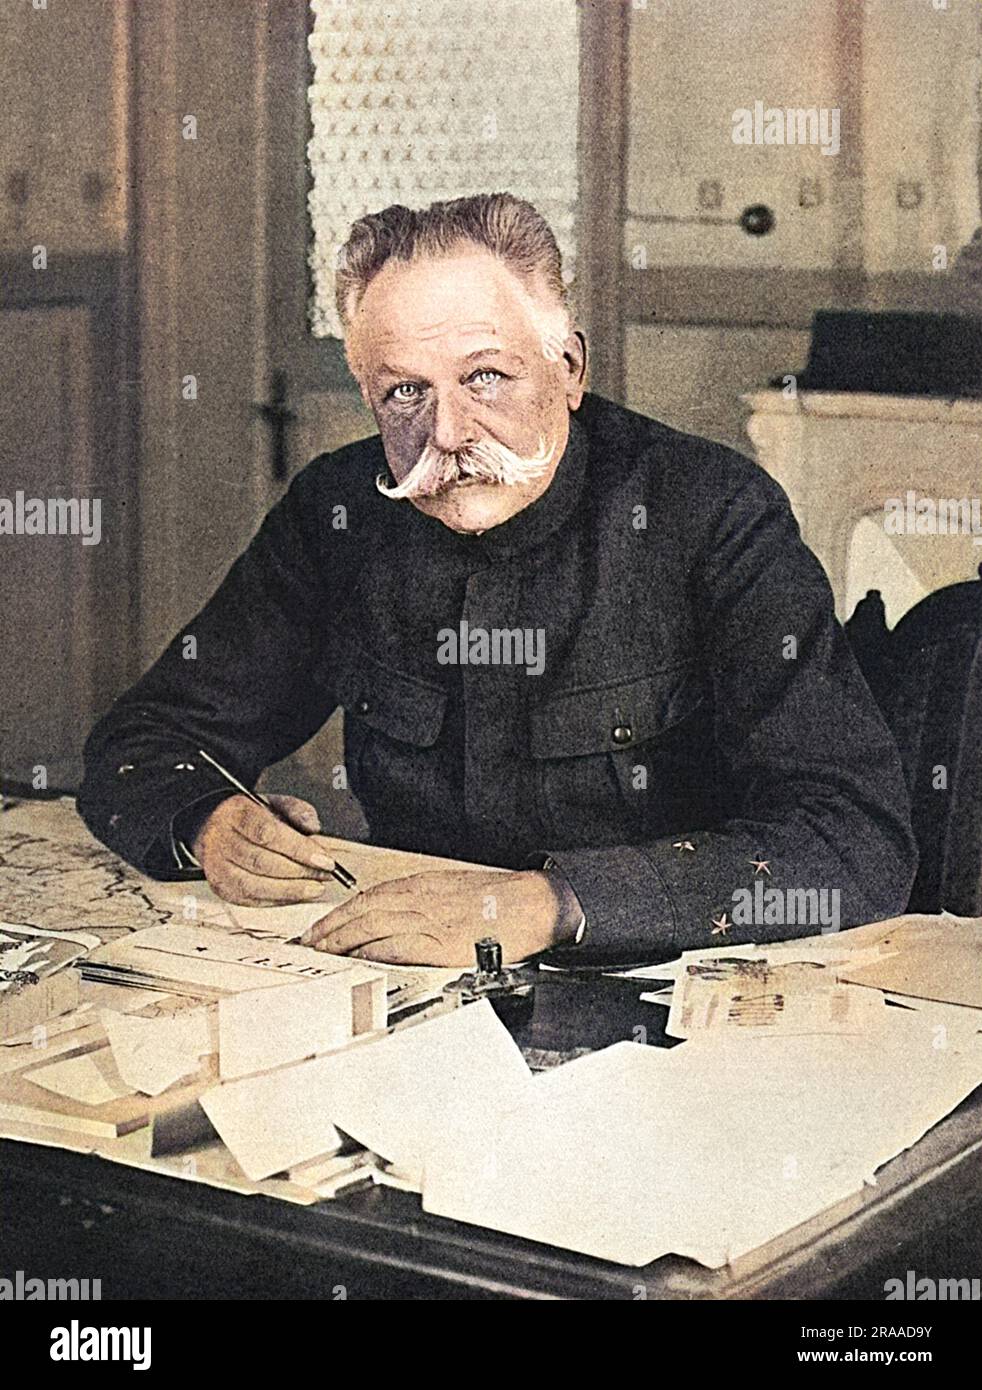 General MAURICE SARRAIL (1856 - 1929) commander of the third army at the battle of the Marne (1914) then of French forces in Gallipoli and later Salonika (1915-17).     Date: 1916 Stock Photo